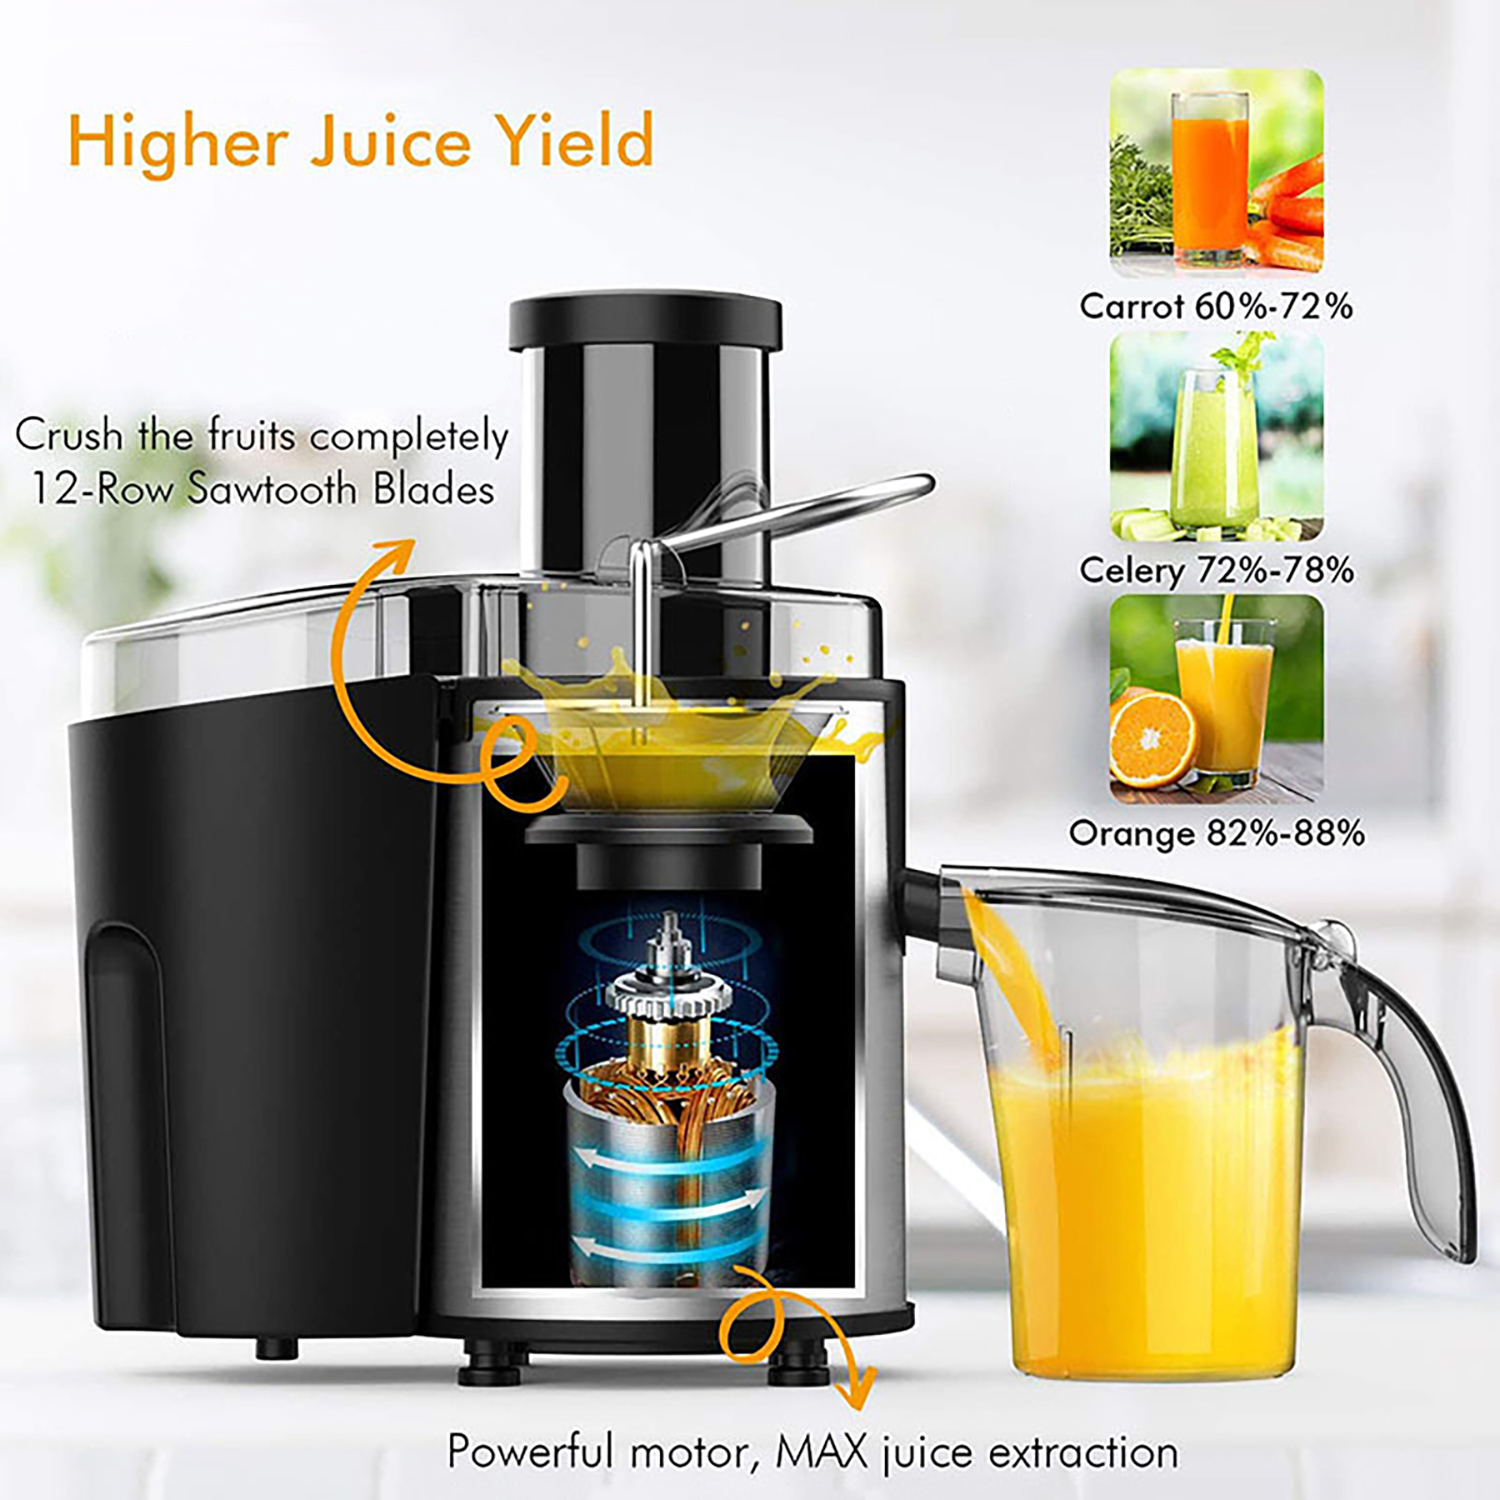 Juicer with high juice yield